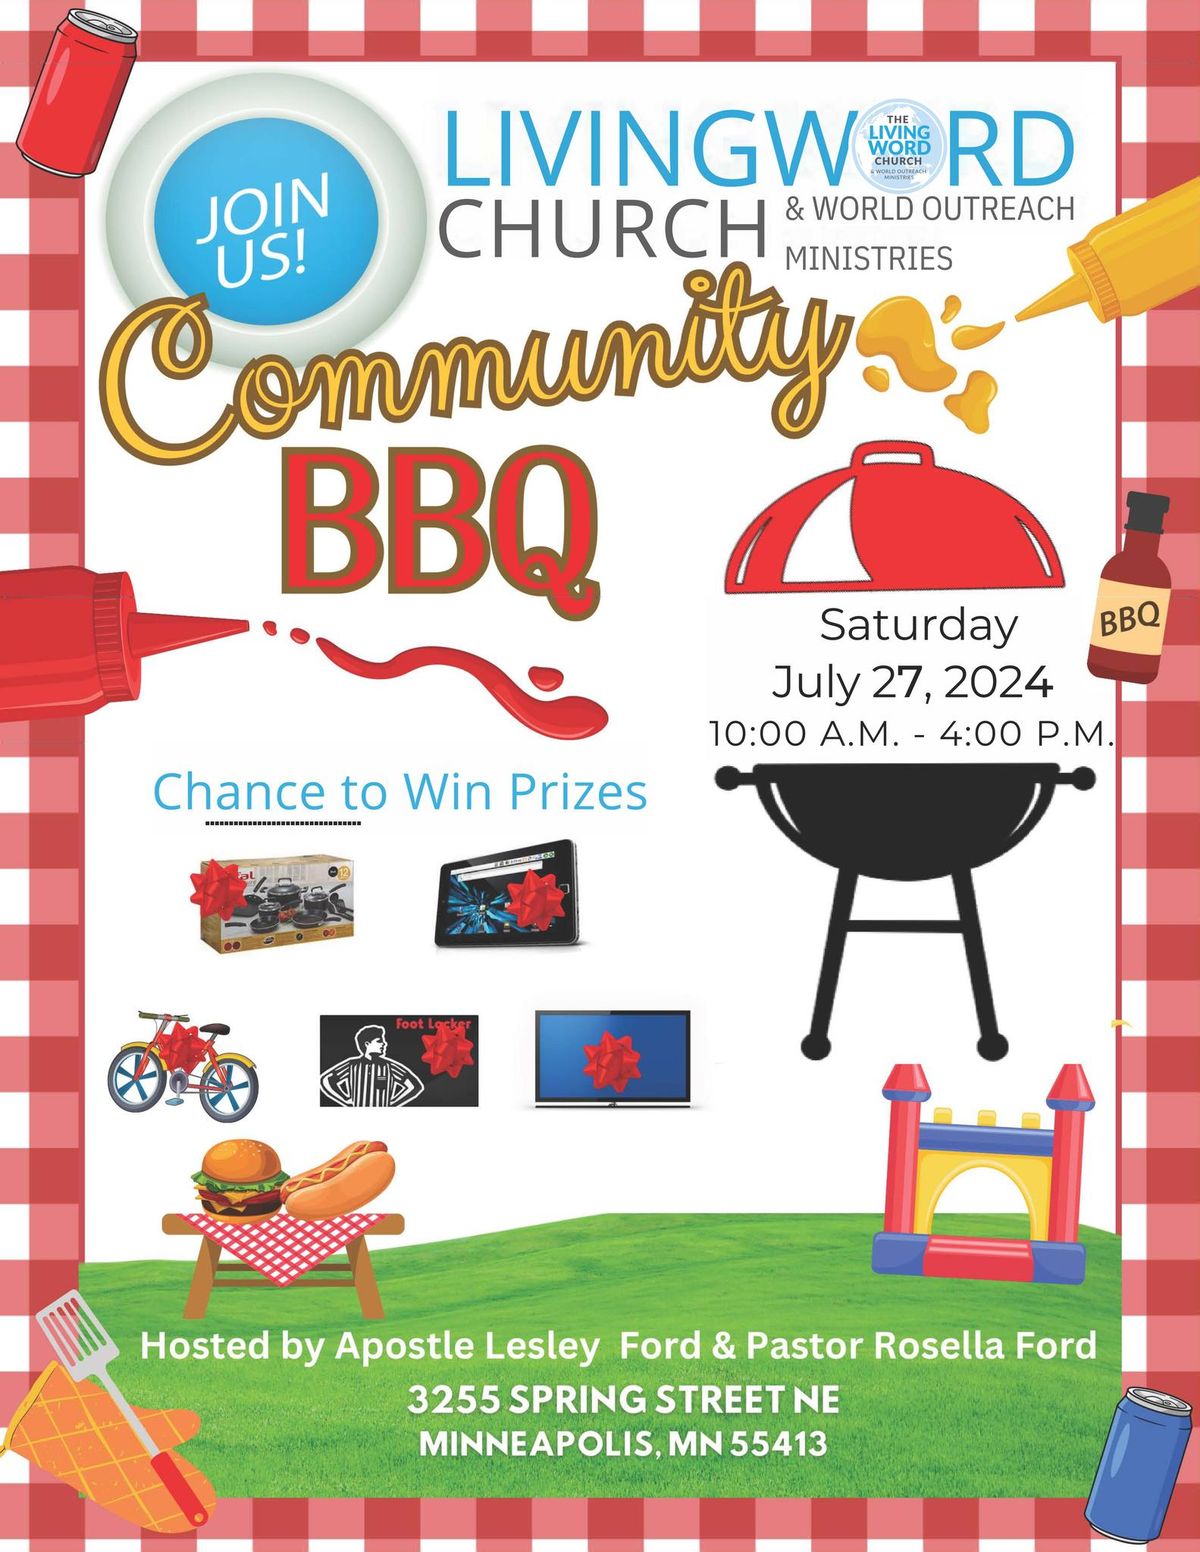 Community BBQ - Living Word Church and World Outreach Ministries